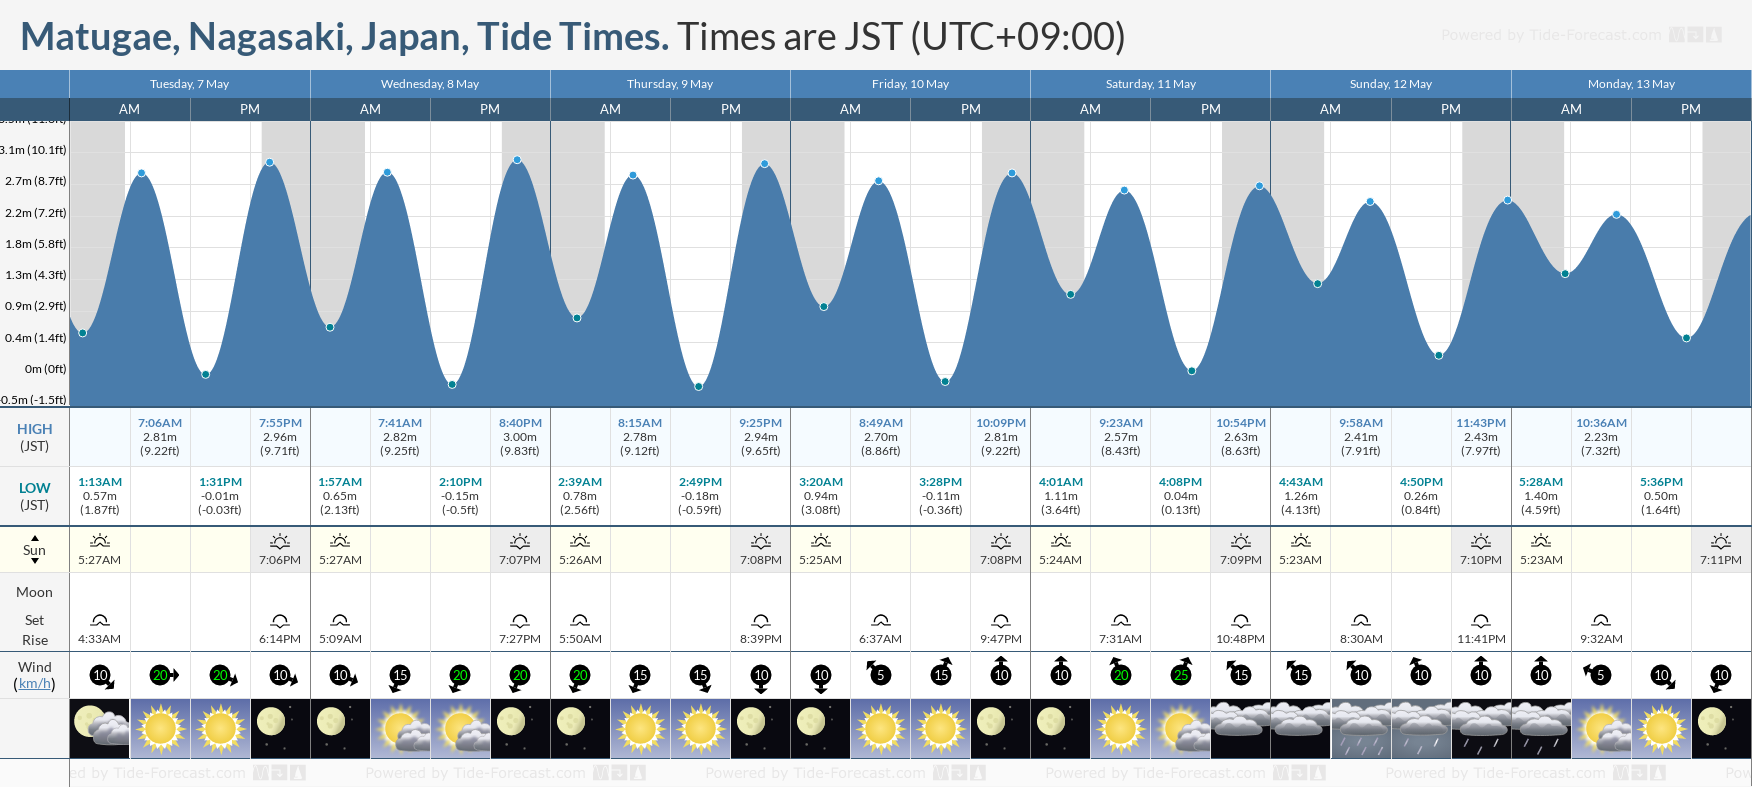 Matugae, Nagasaki, Japan Tide Chart including high and low tide tide times for the next 7 days